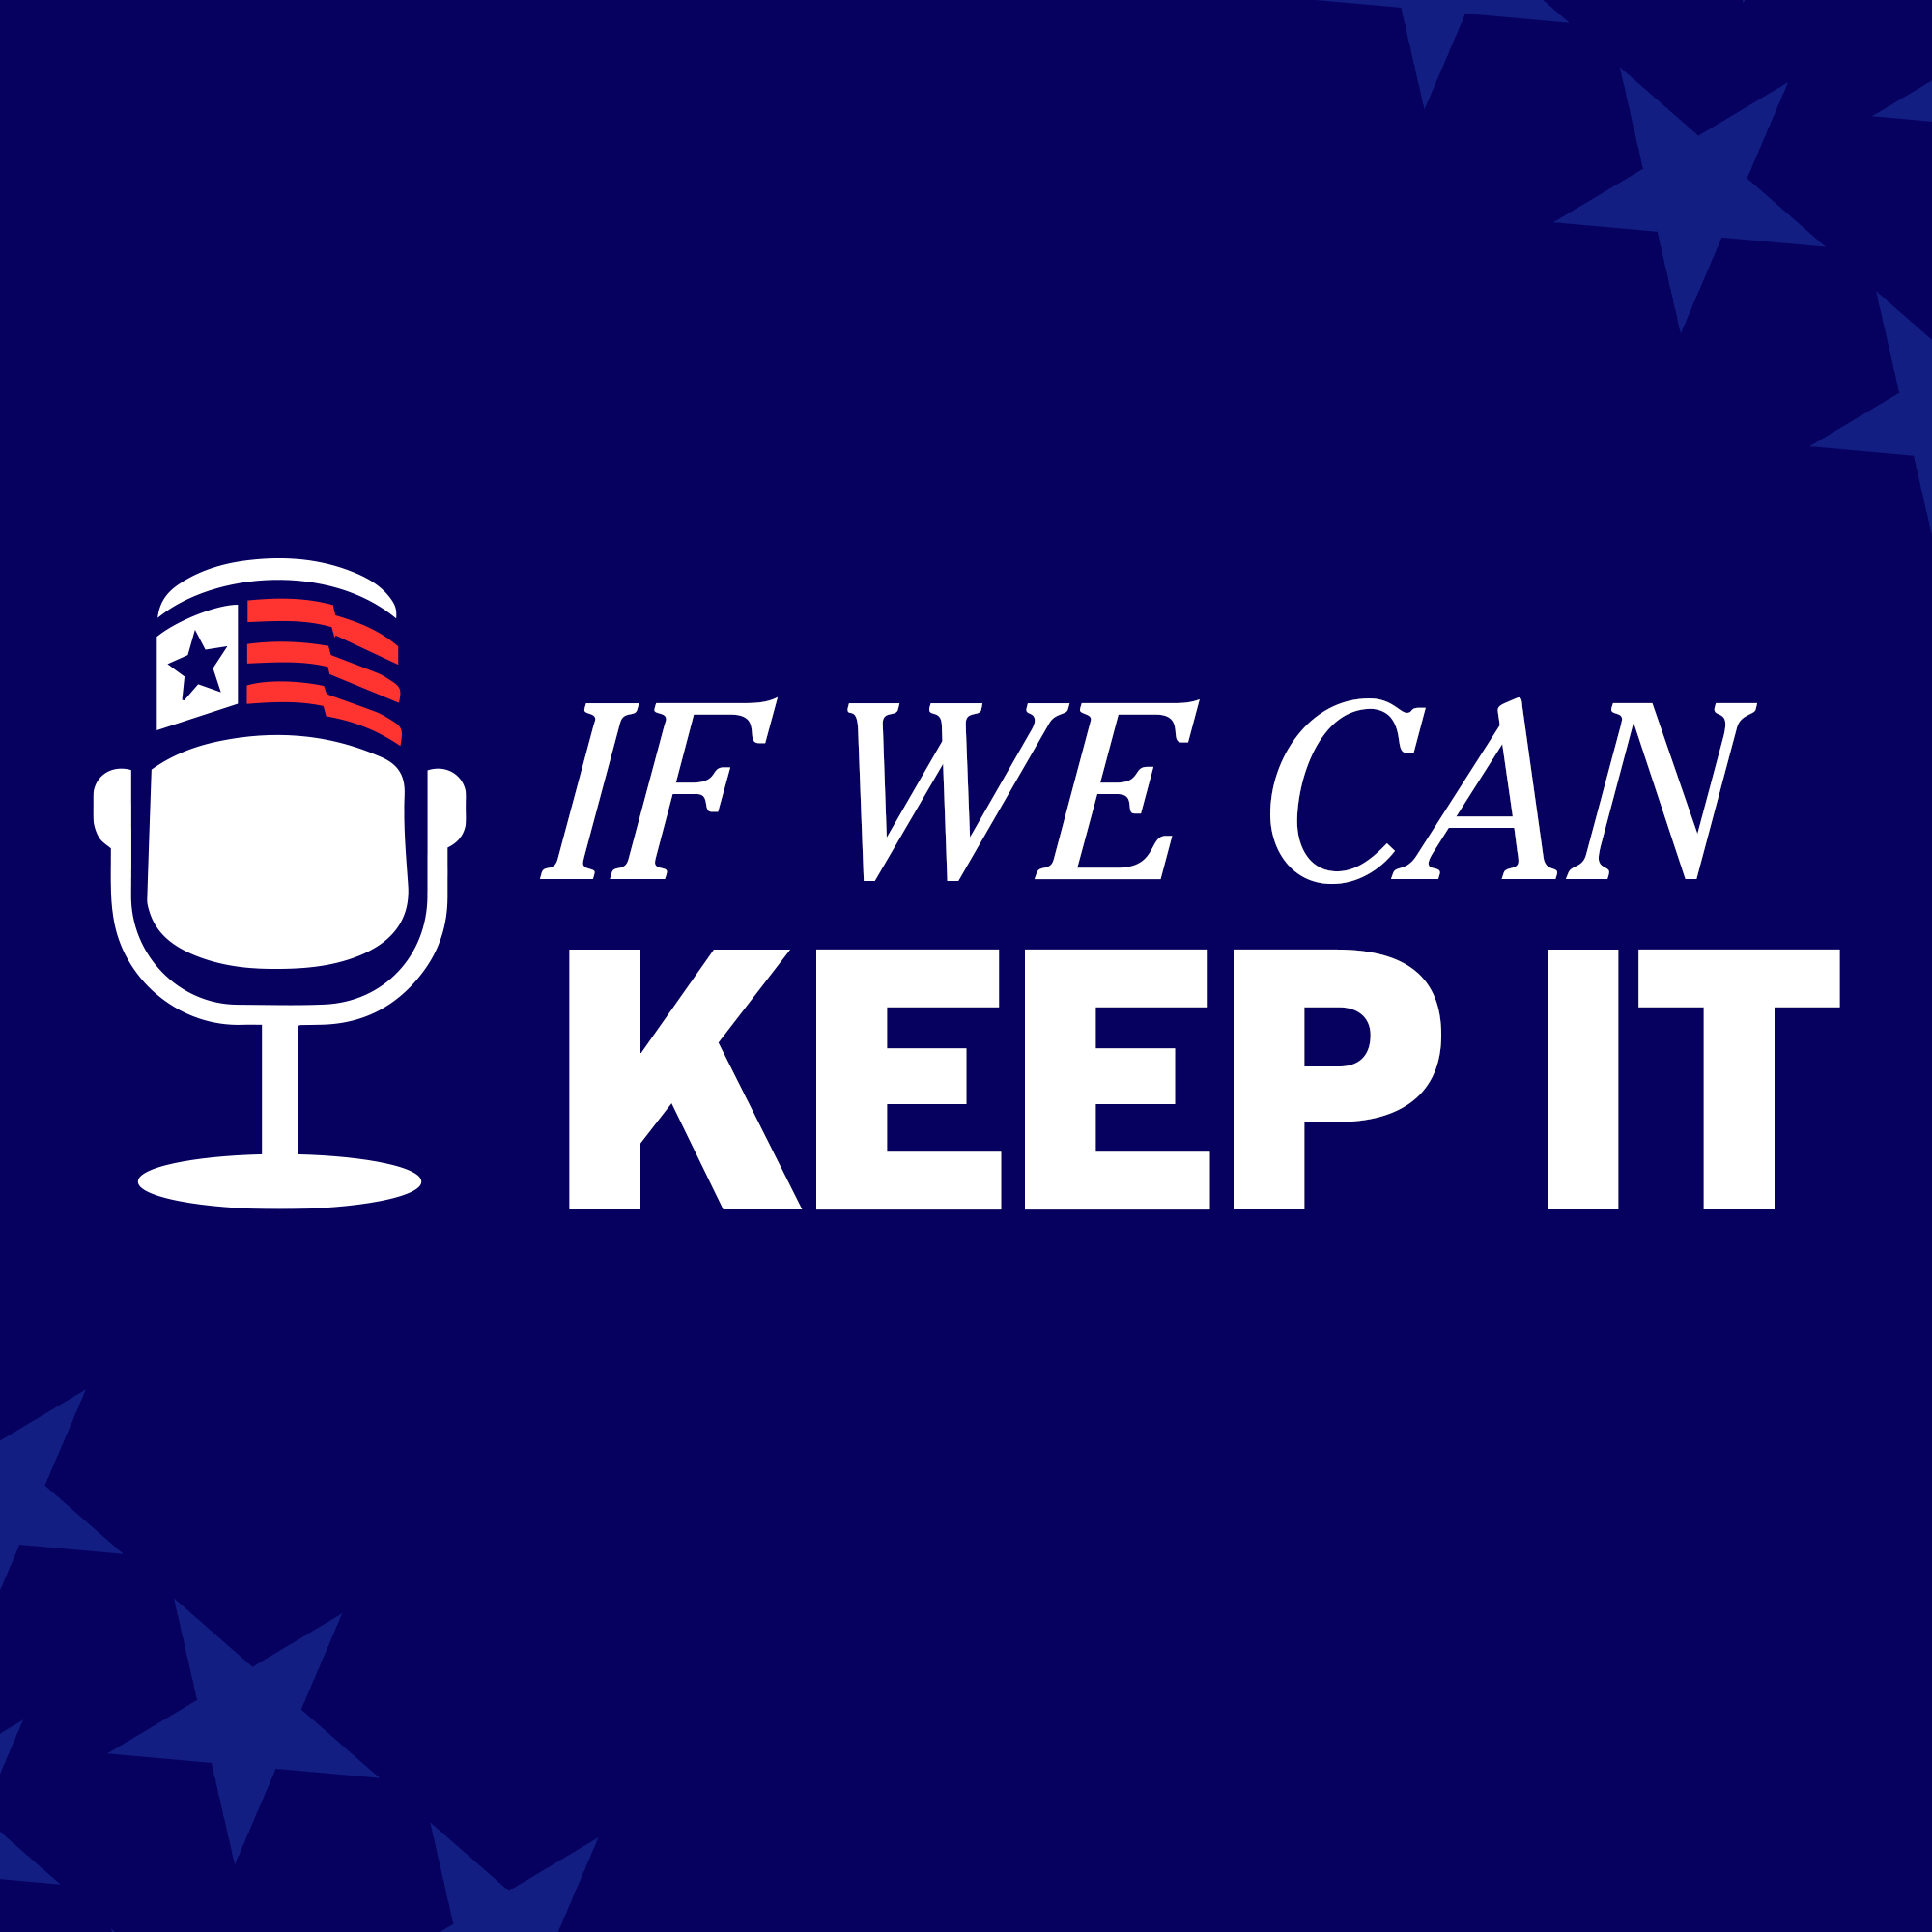 Keep Our Republic Debuts If We Can Keep It, Podcast Series Spotlighting The Challenges & Resilience Of American Democracy